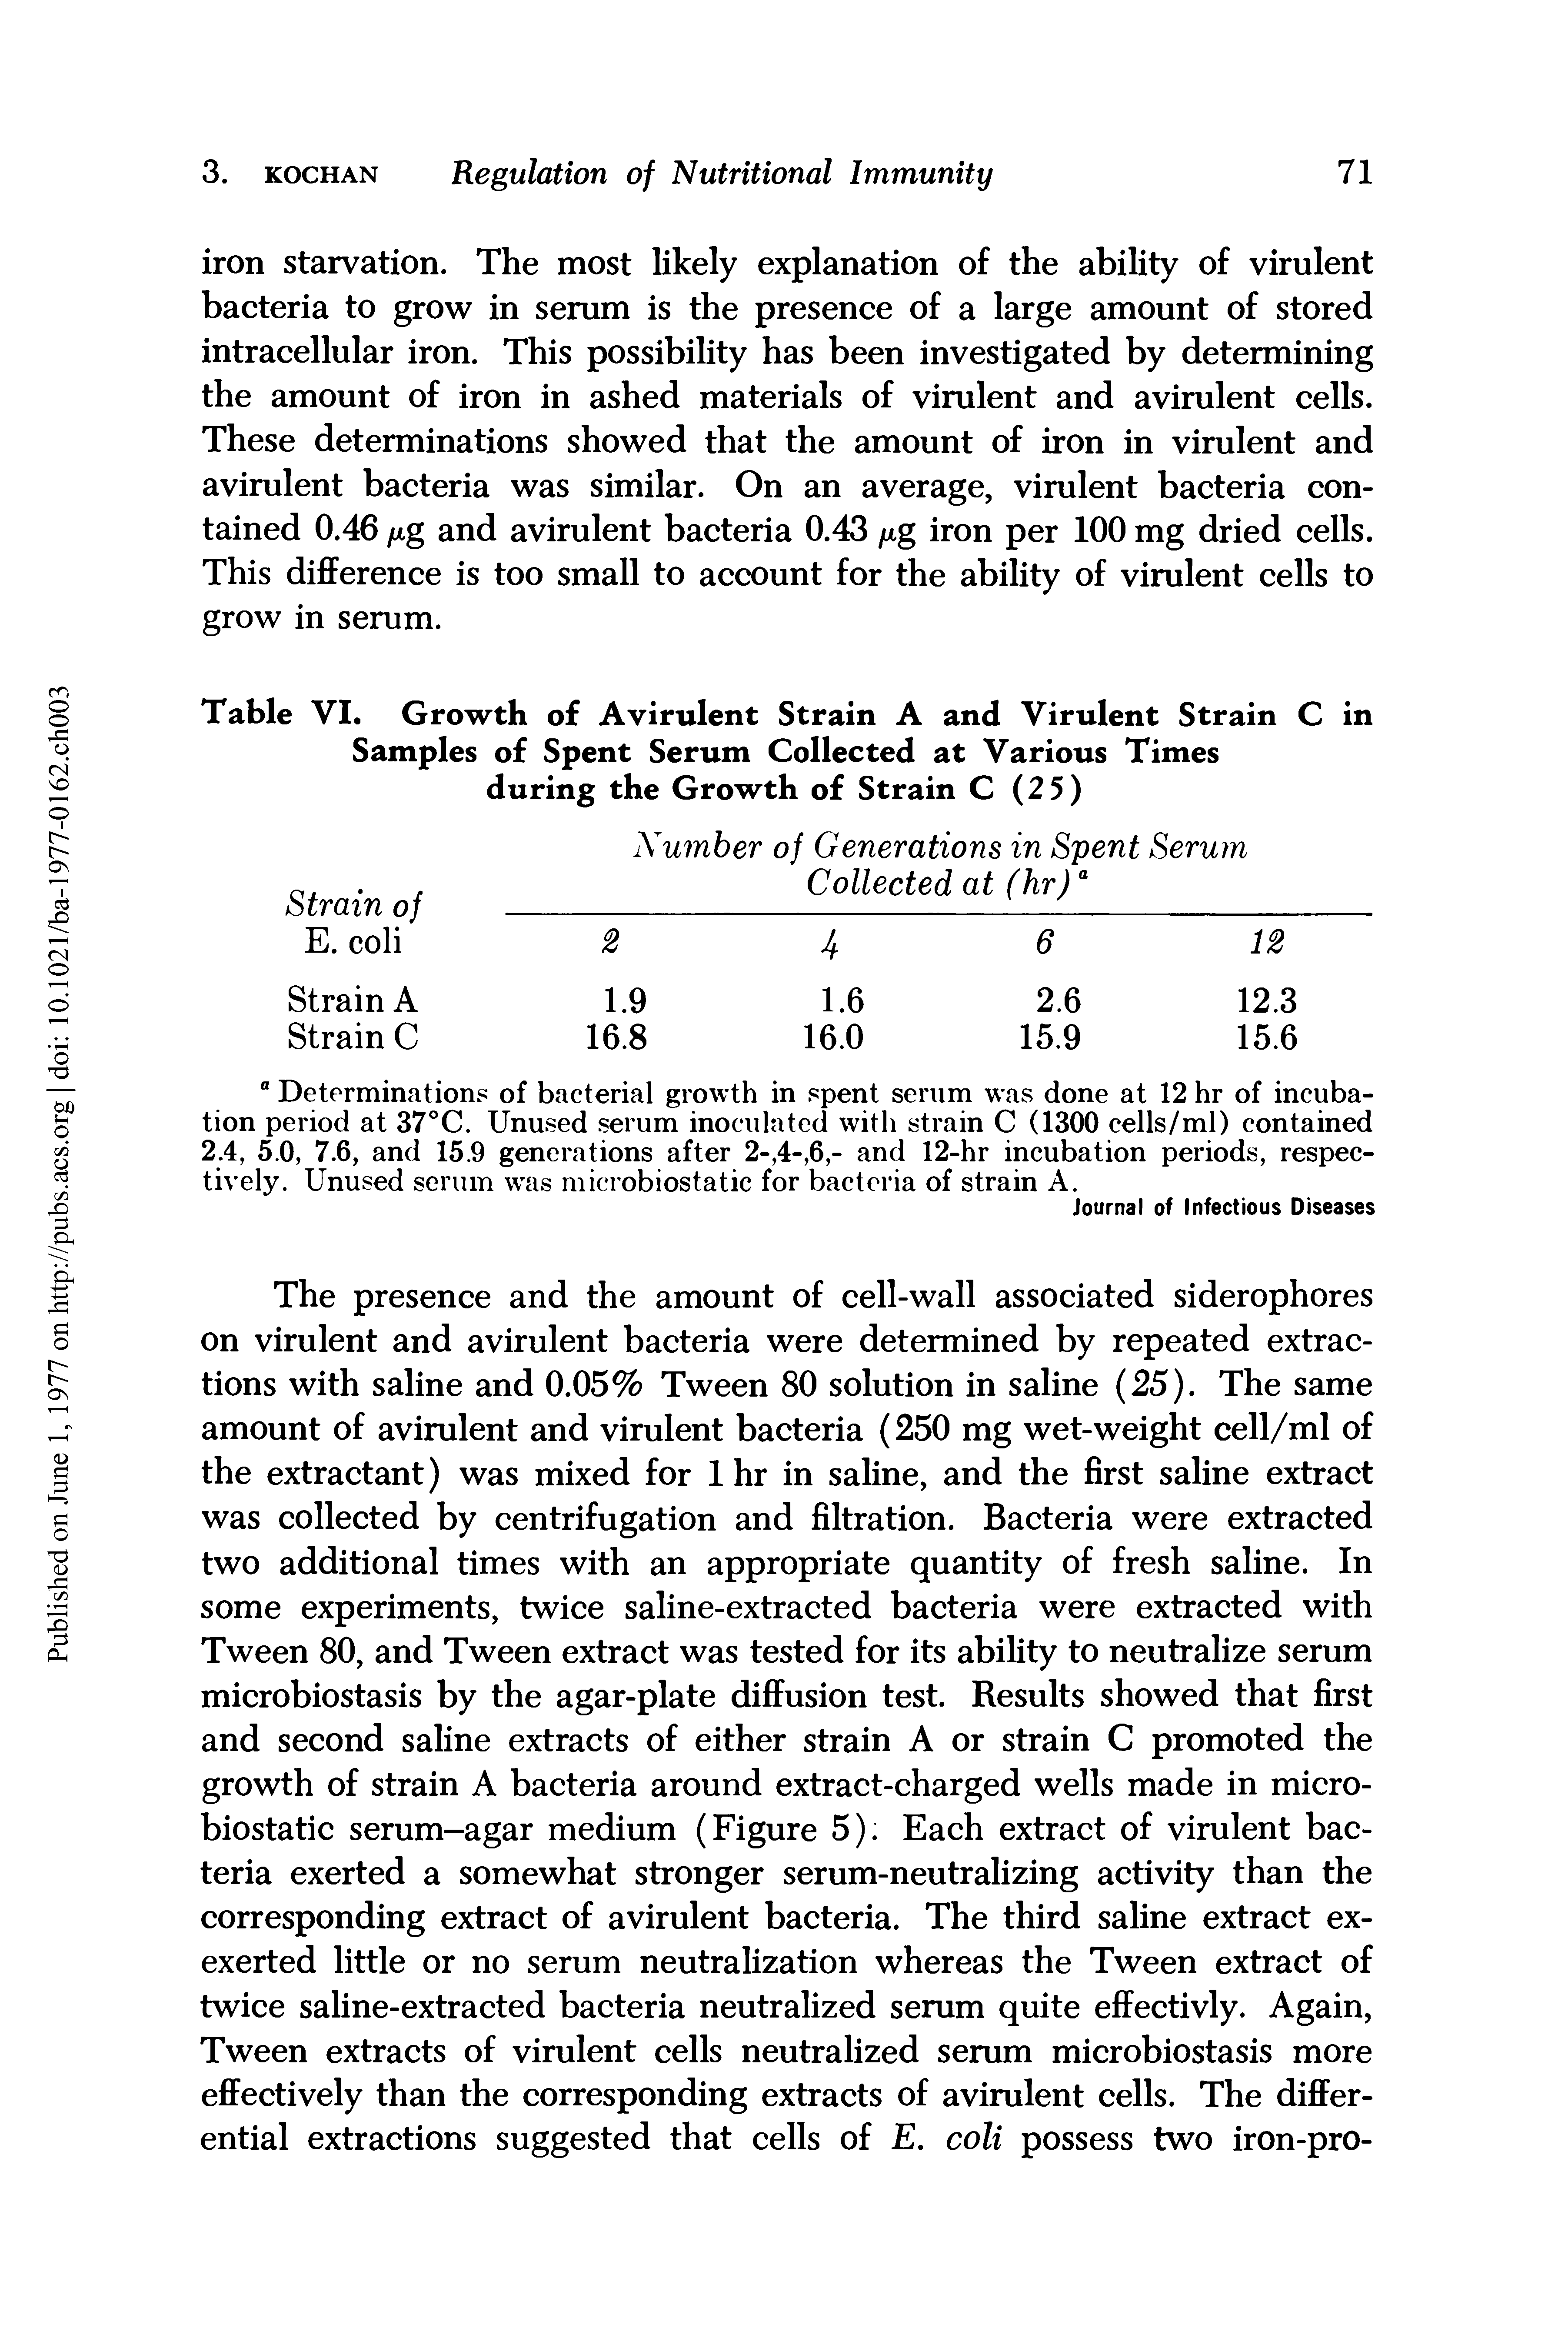 Table VI. Growth of Avirulent Strain A and Virulent Strain C in Samples of Spent Serum Collected at Various Times during the Growth of Strain C (2 5)...